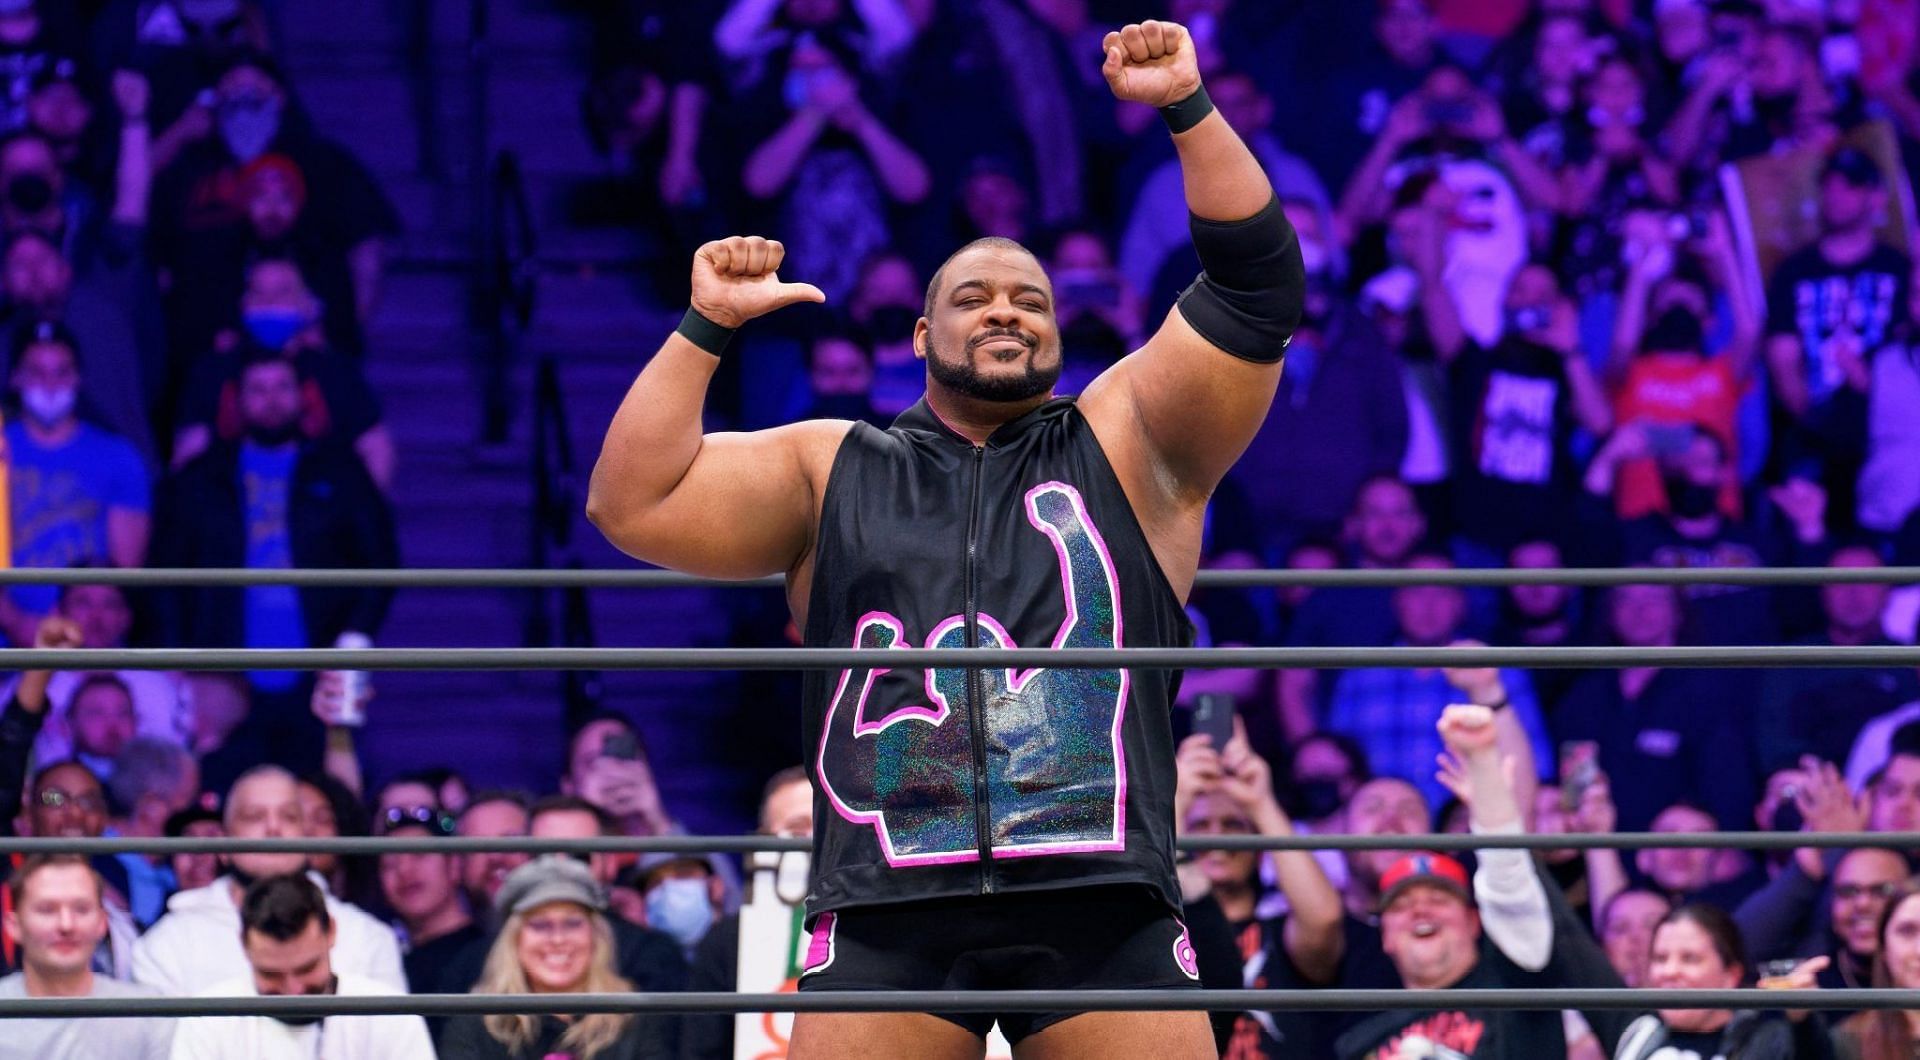 The Limitless One is the latest former WWE star to join AEW.